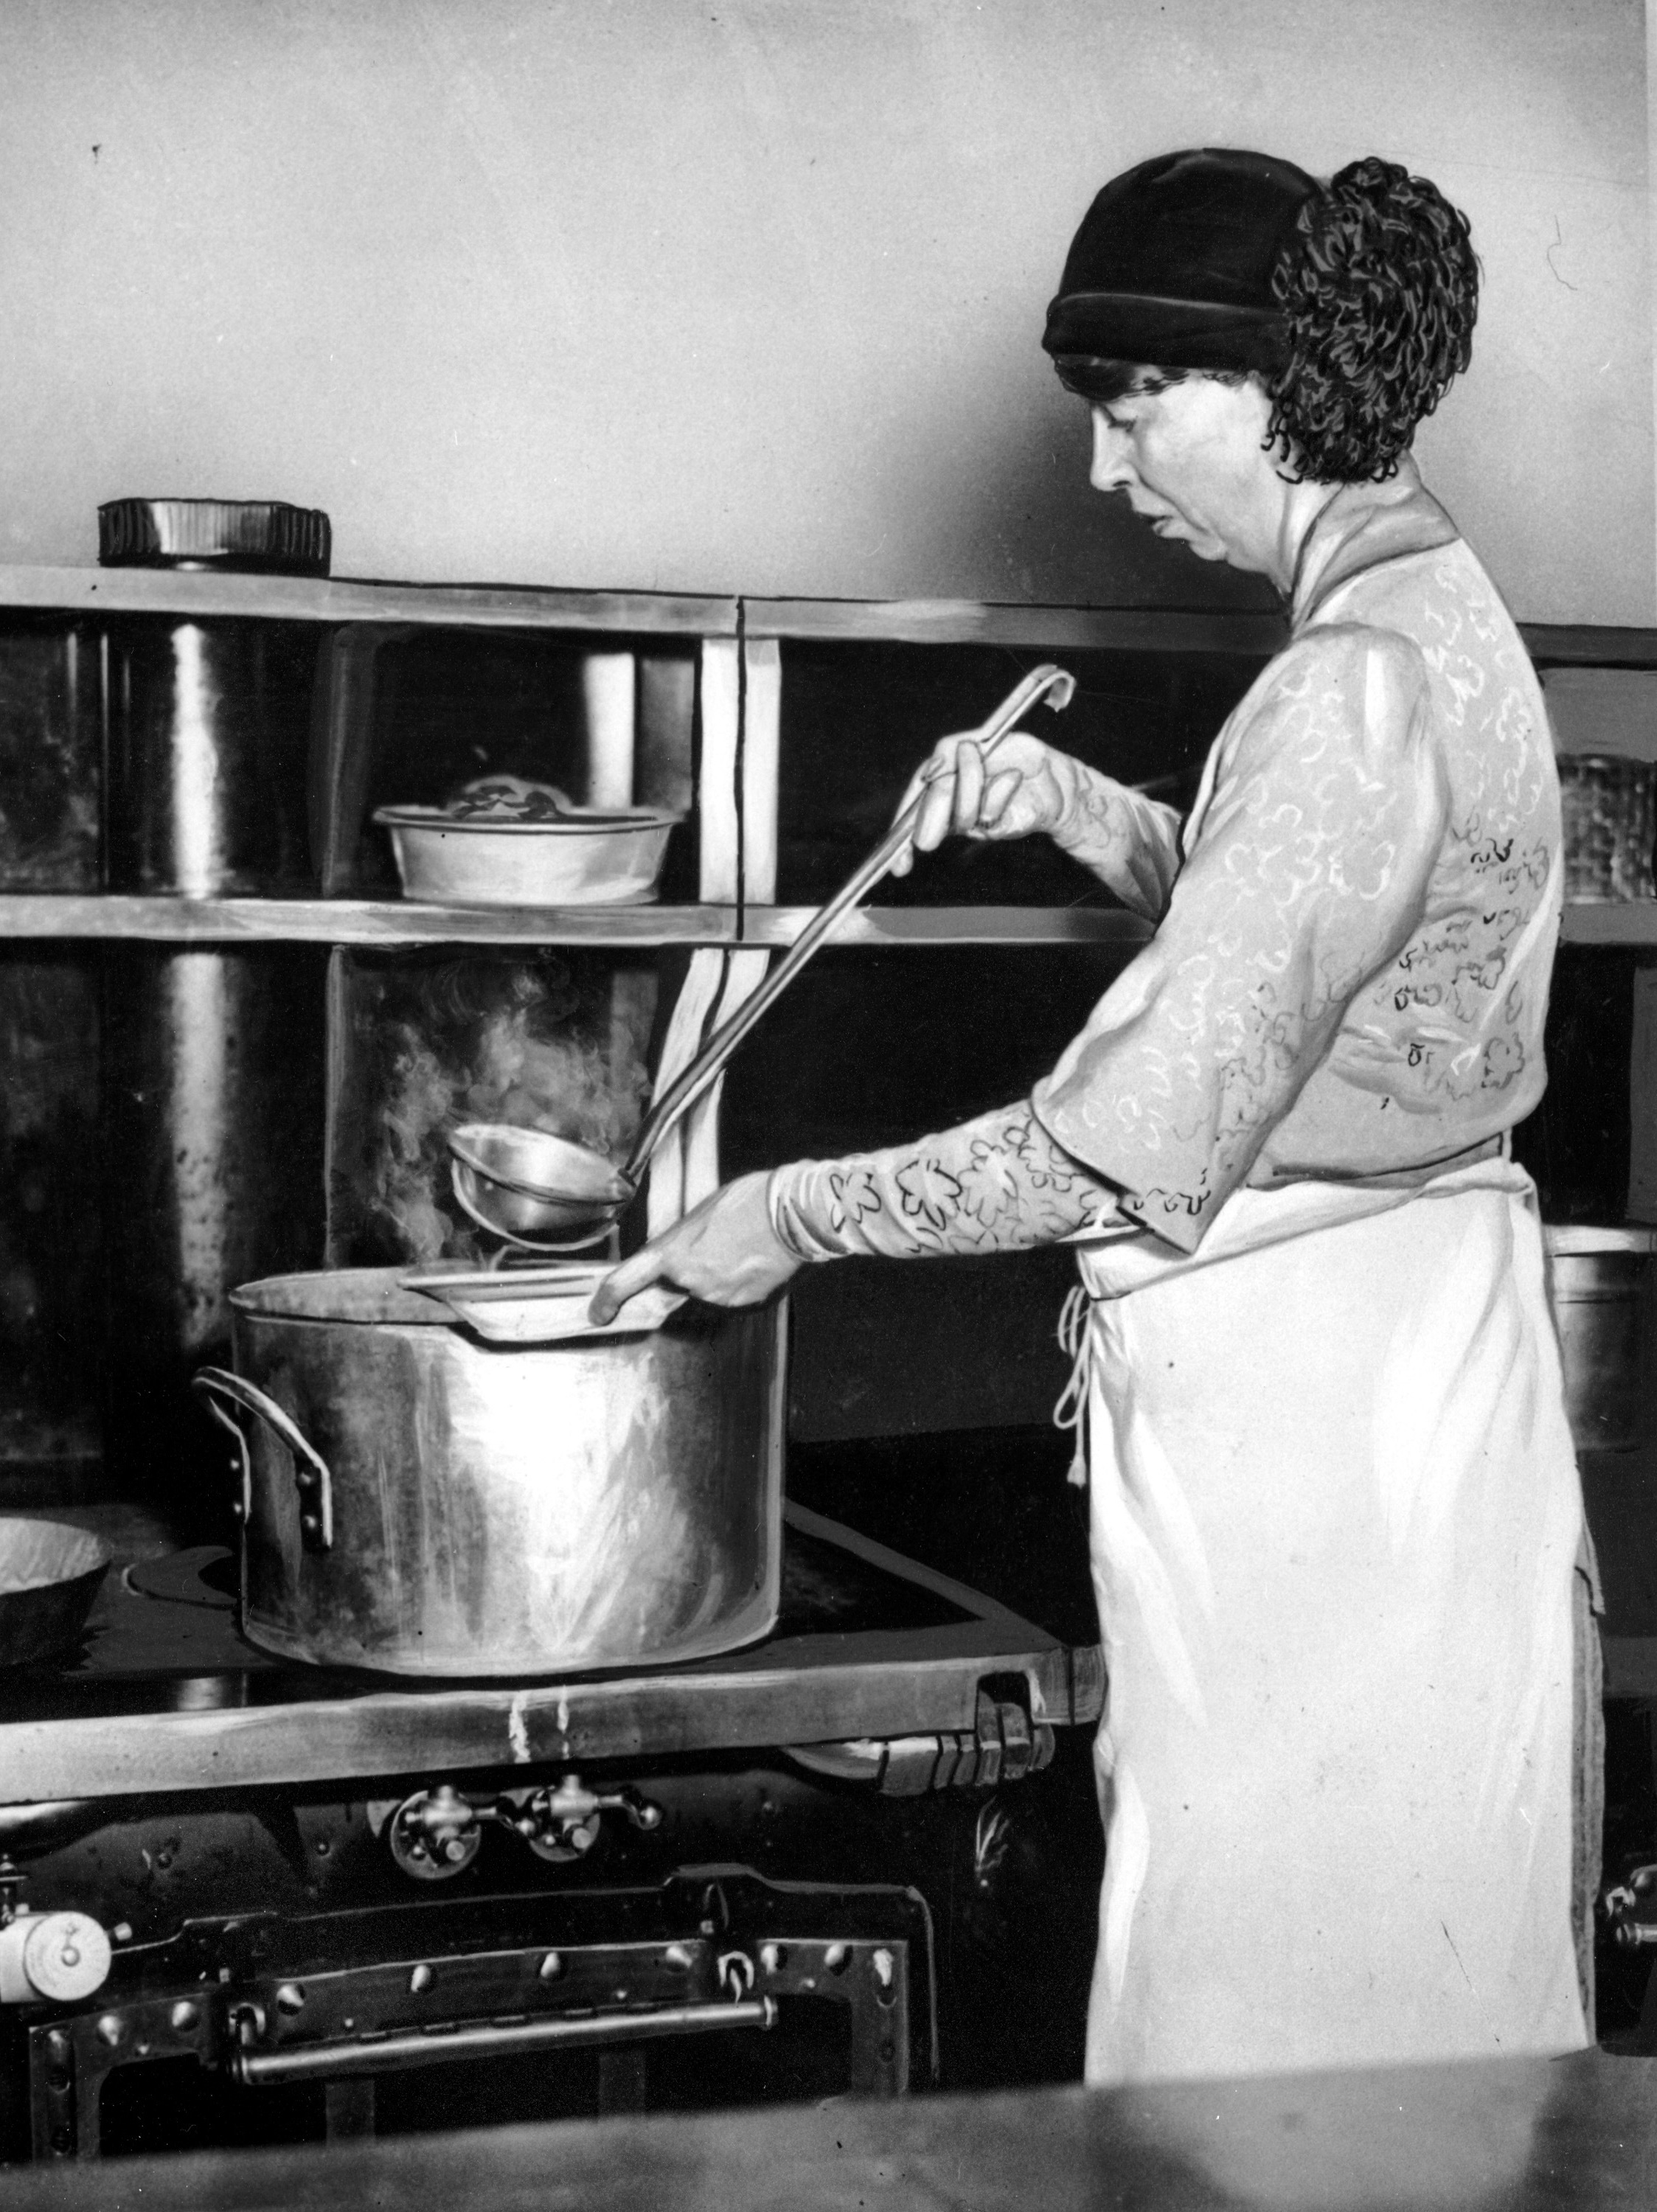 Eleanor Roosevelt ladles soup into a bowl to help feed unemployed women in the Grand Central Restaurant kitchen in New York City in 1932 during the Great Depression.